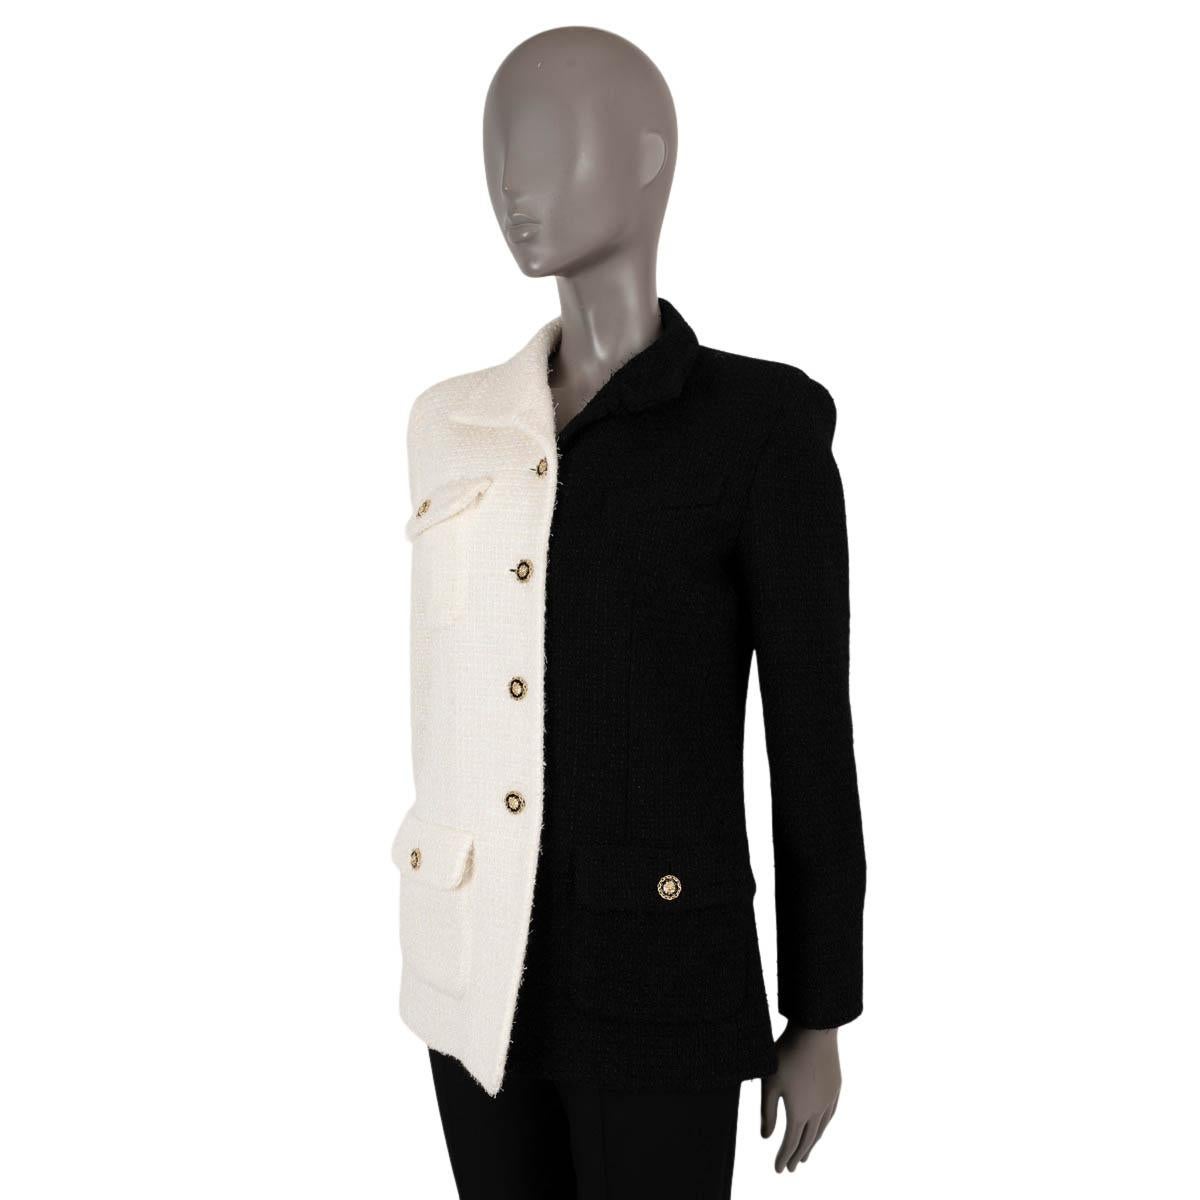 100% authentic Chanel bi-color tweed jacket in white and black wool (62%) and polyamide (38%). This iconic jacket features three buttoned flap pockets and an asymmetric collar. Closes with gold-tone lion head buttons and is lined in silk (100%). Has